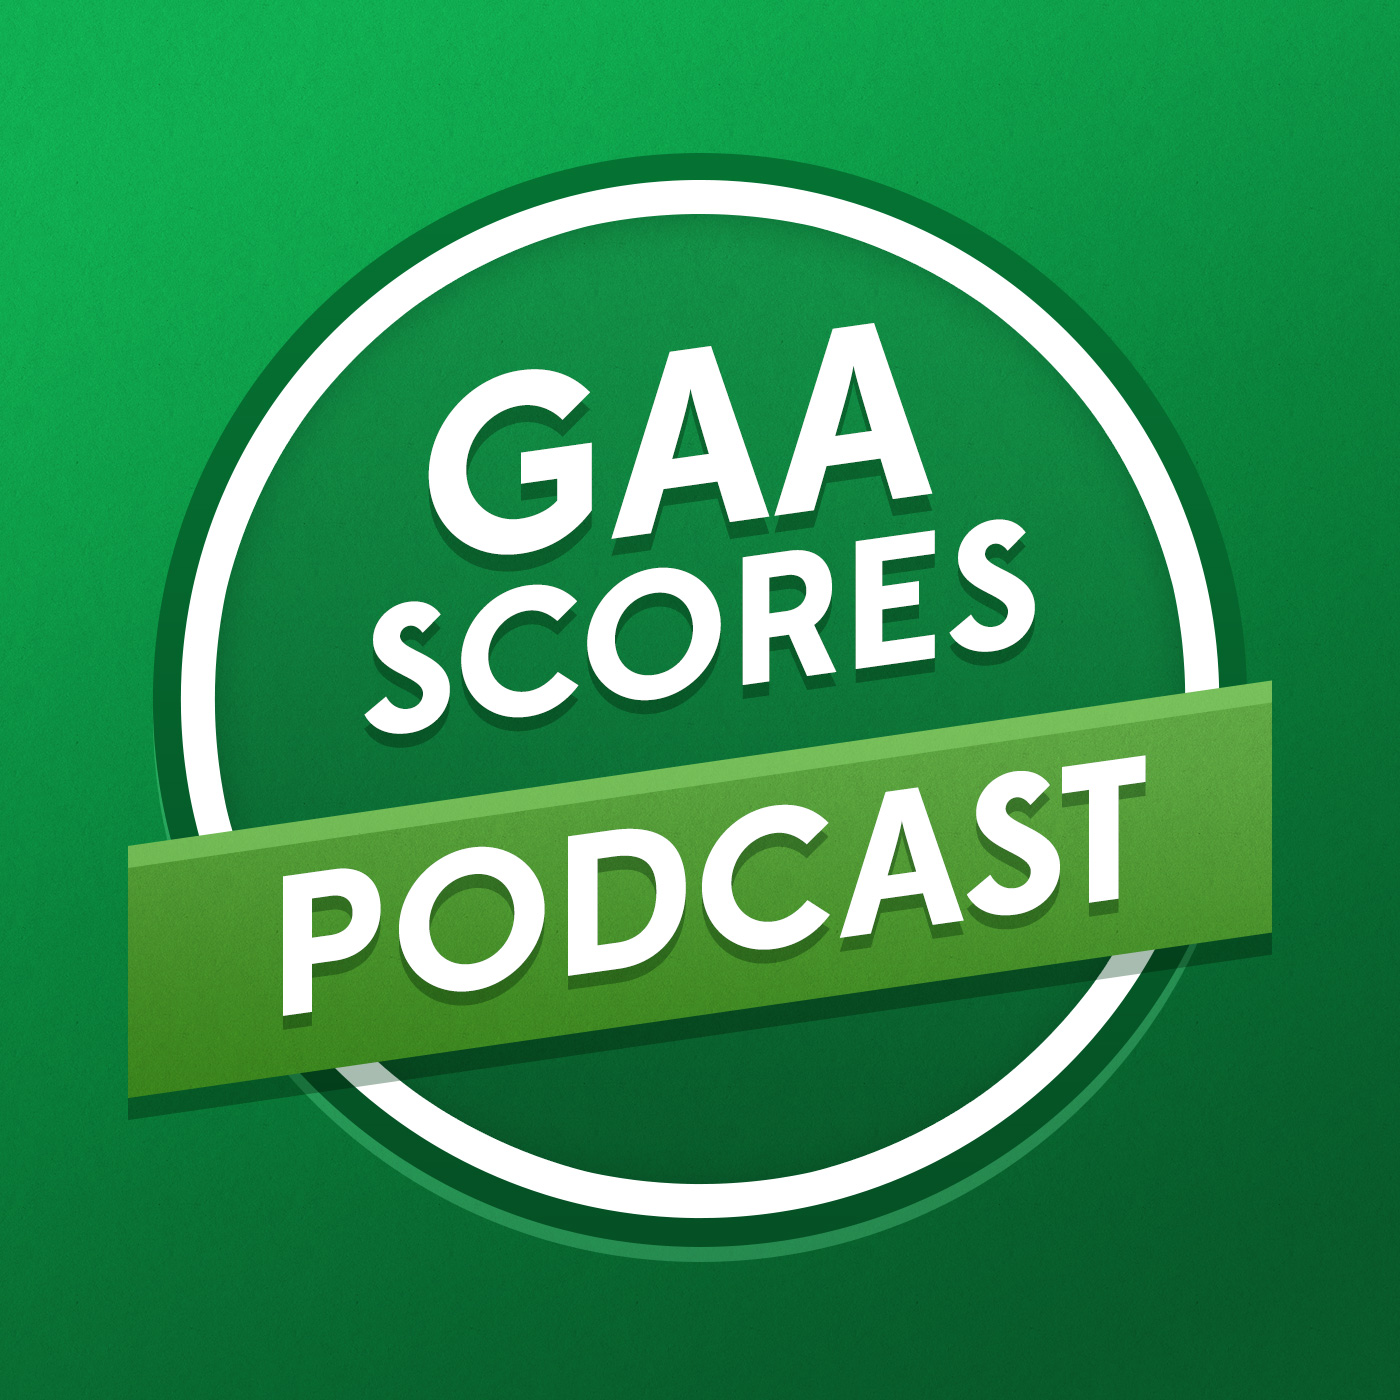 #77 – Slaughtneil march on, Down’s form & David Tubridy on Clare football’s revival